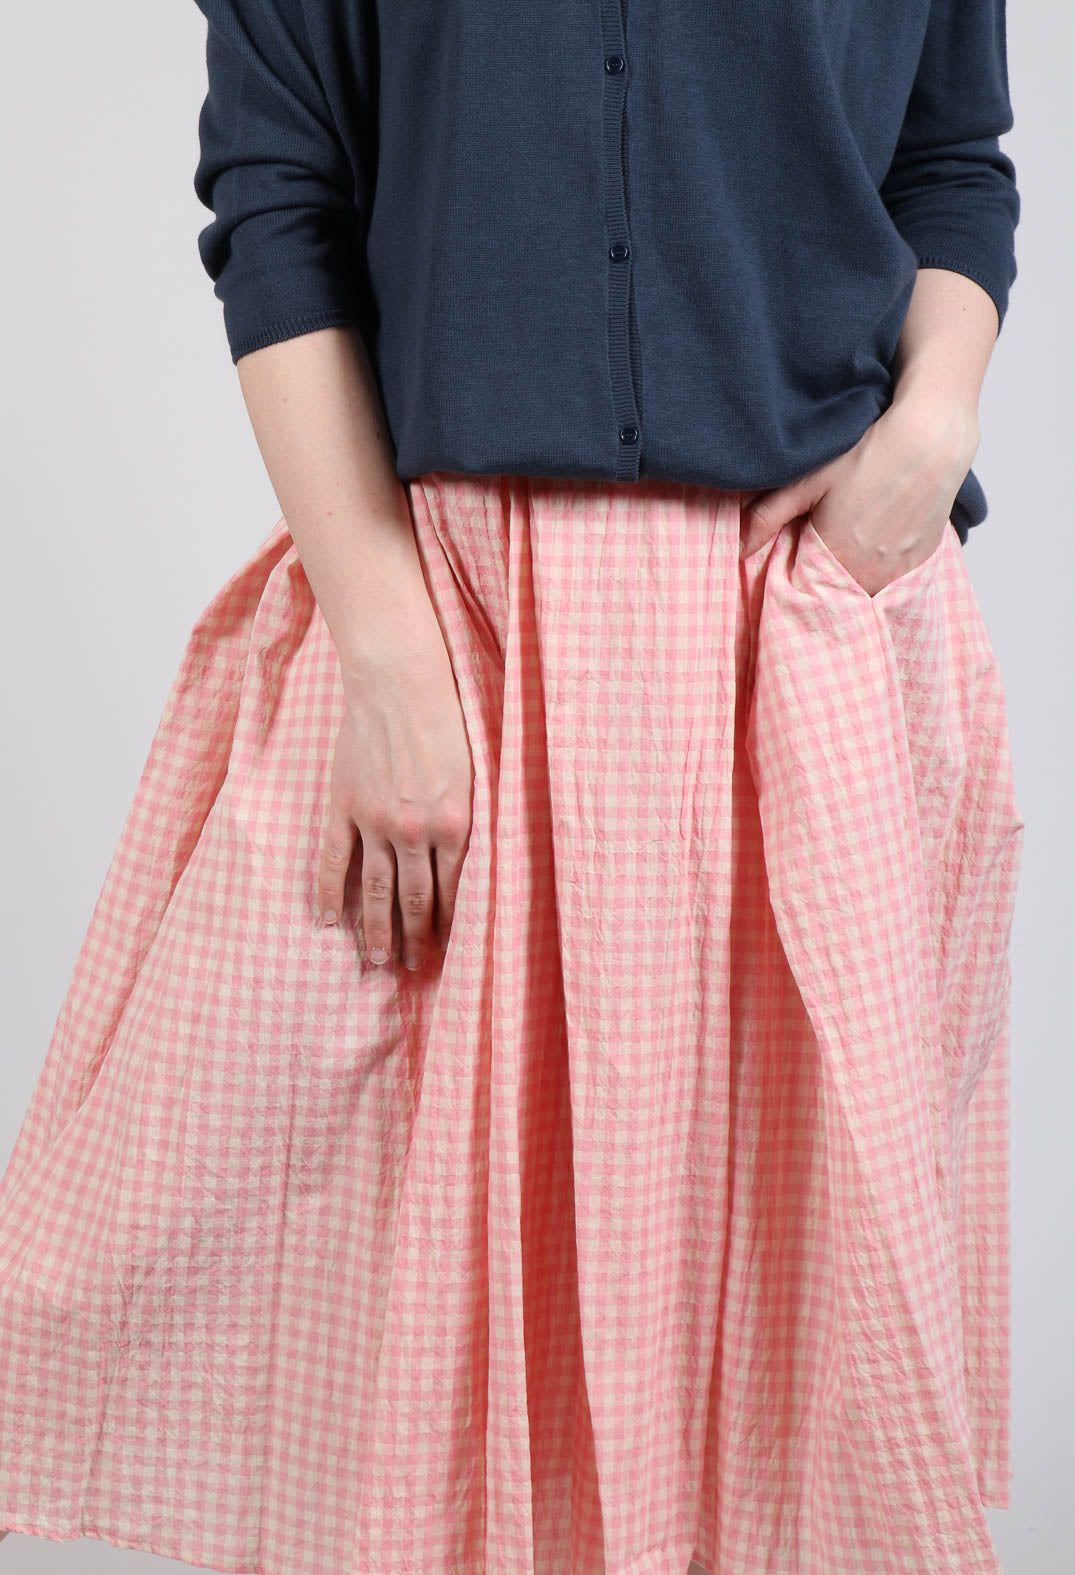 Gingham Skirt in Pink